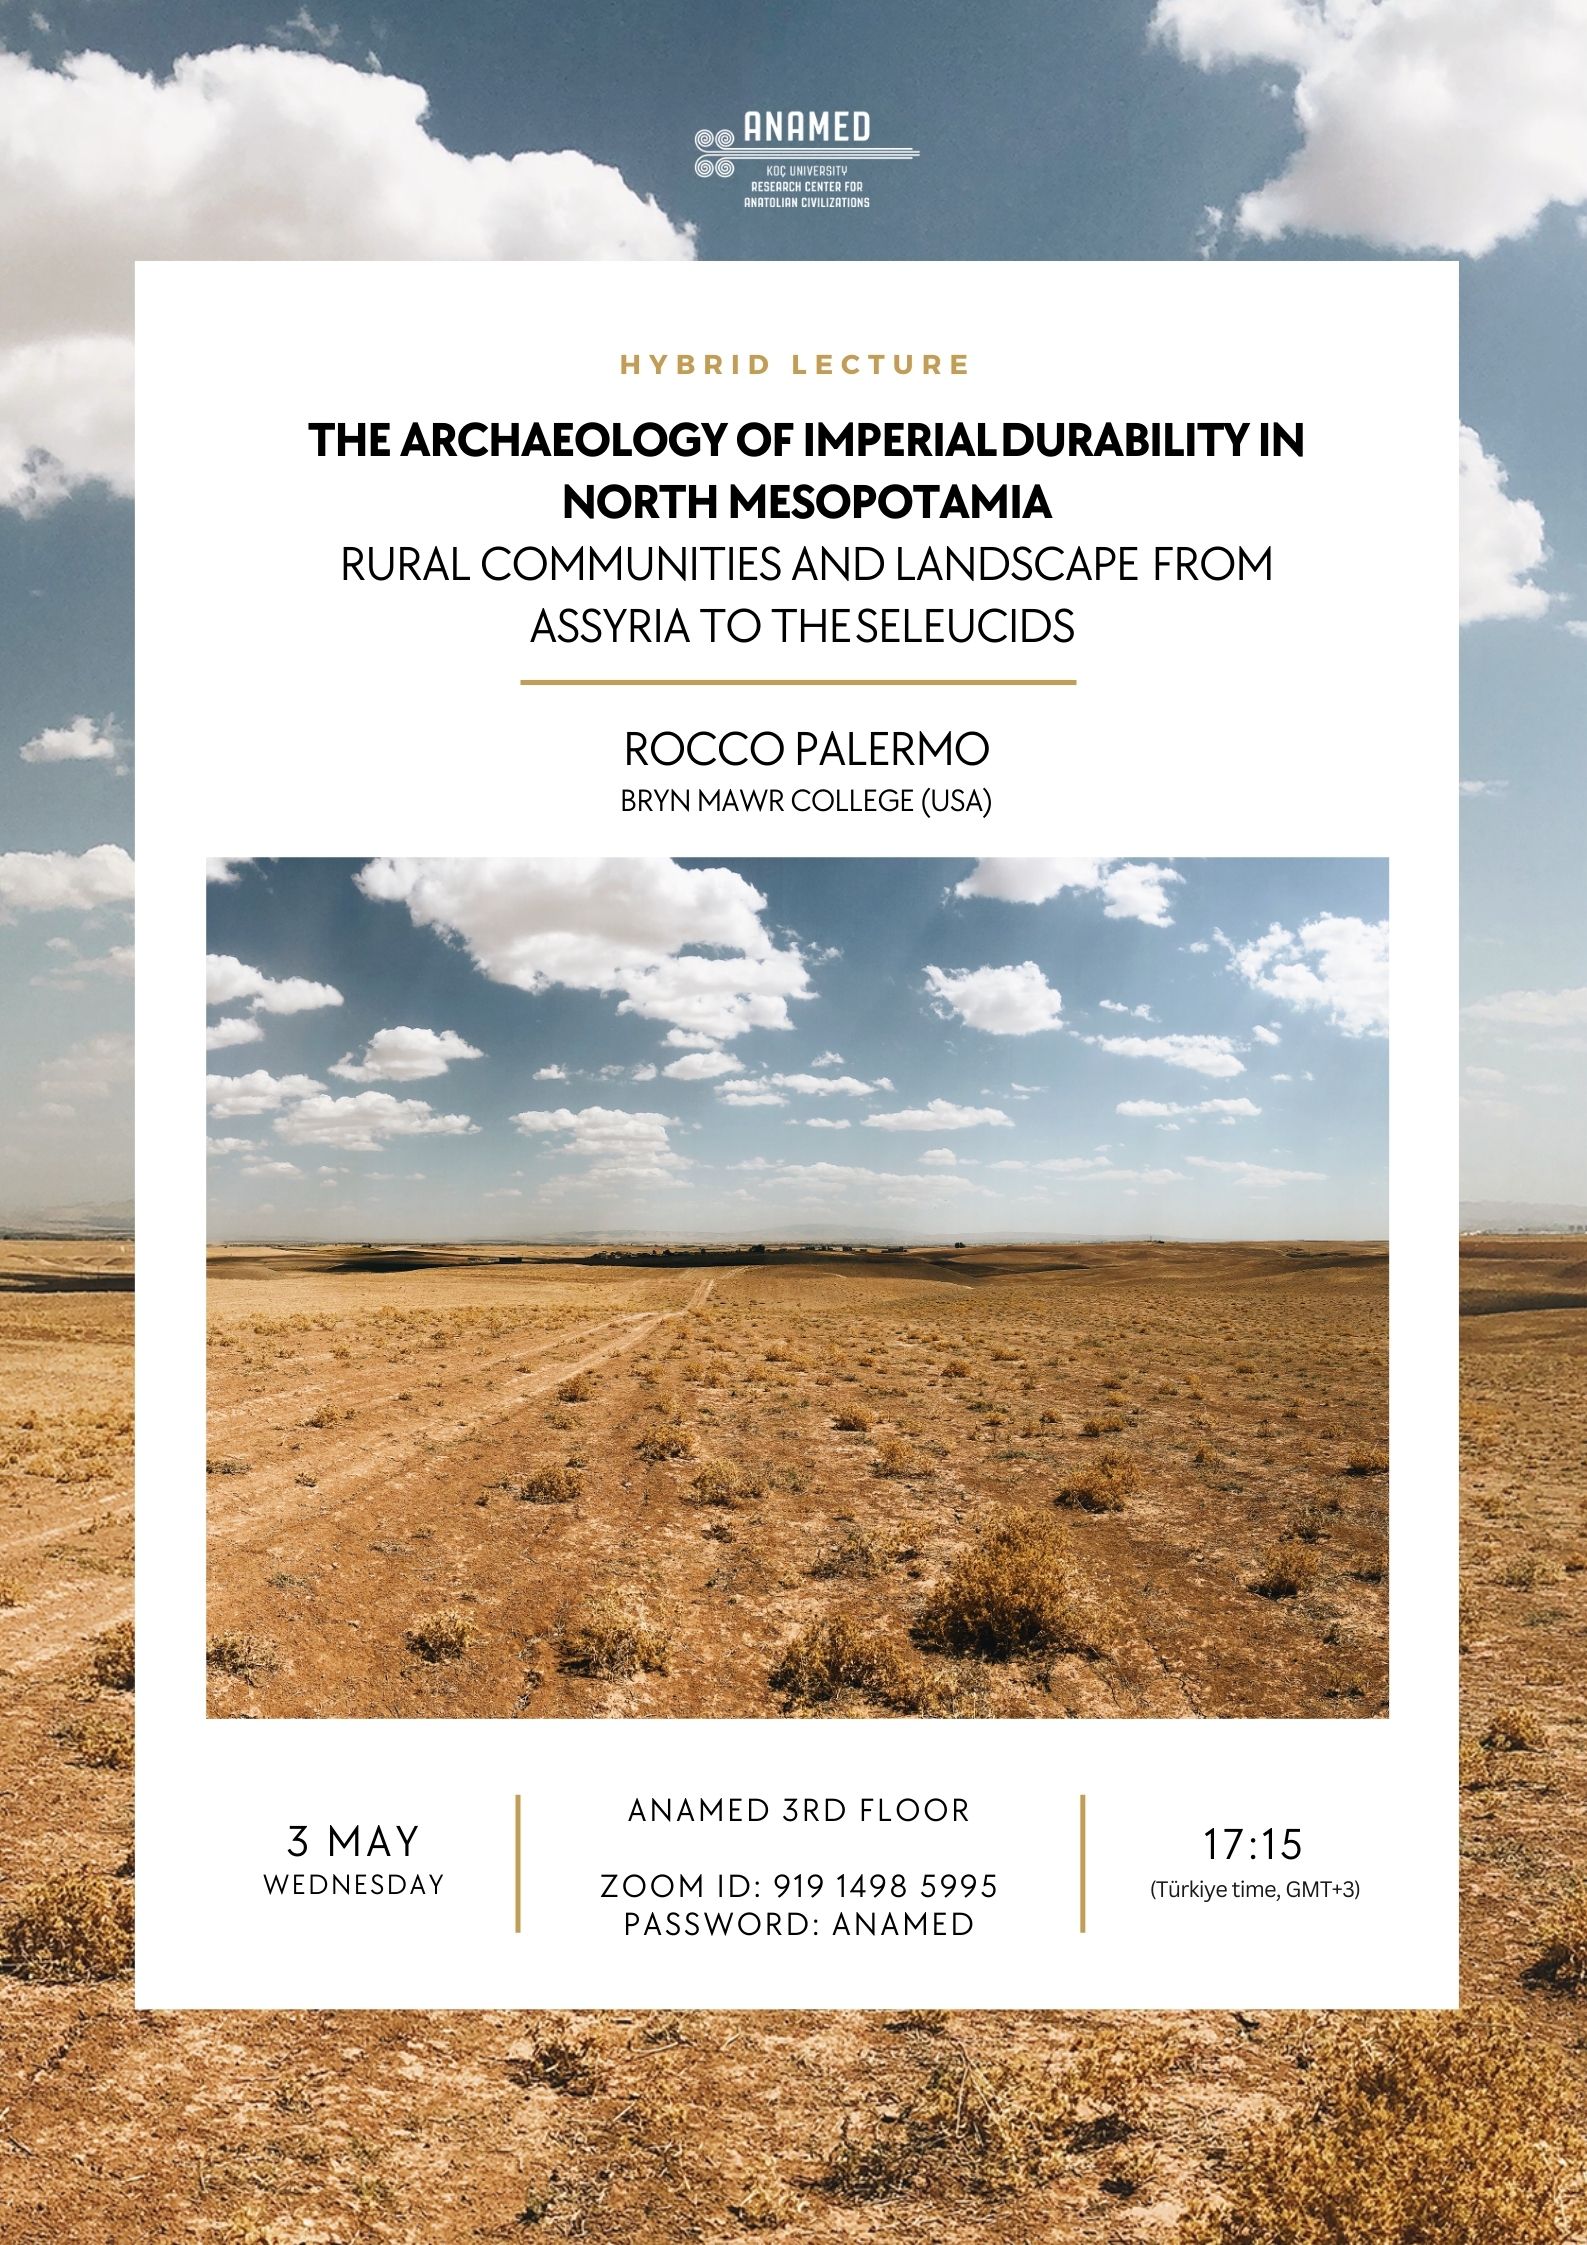 ANAMED Lecture – The Archaeology of Imperial Durability in North Mesopotamia: Rural Communities and Landscape from Assyria to the Seleucids